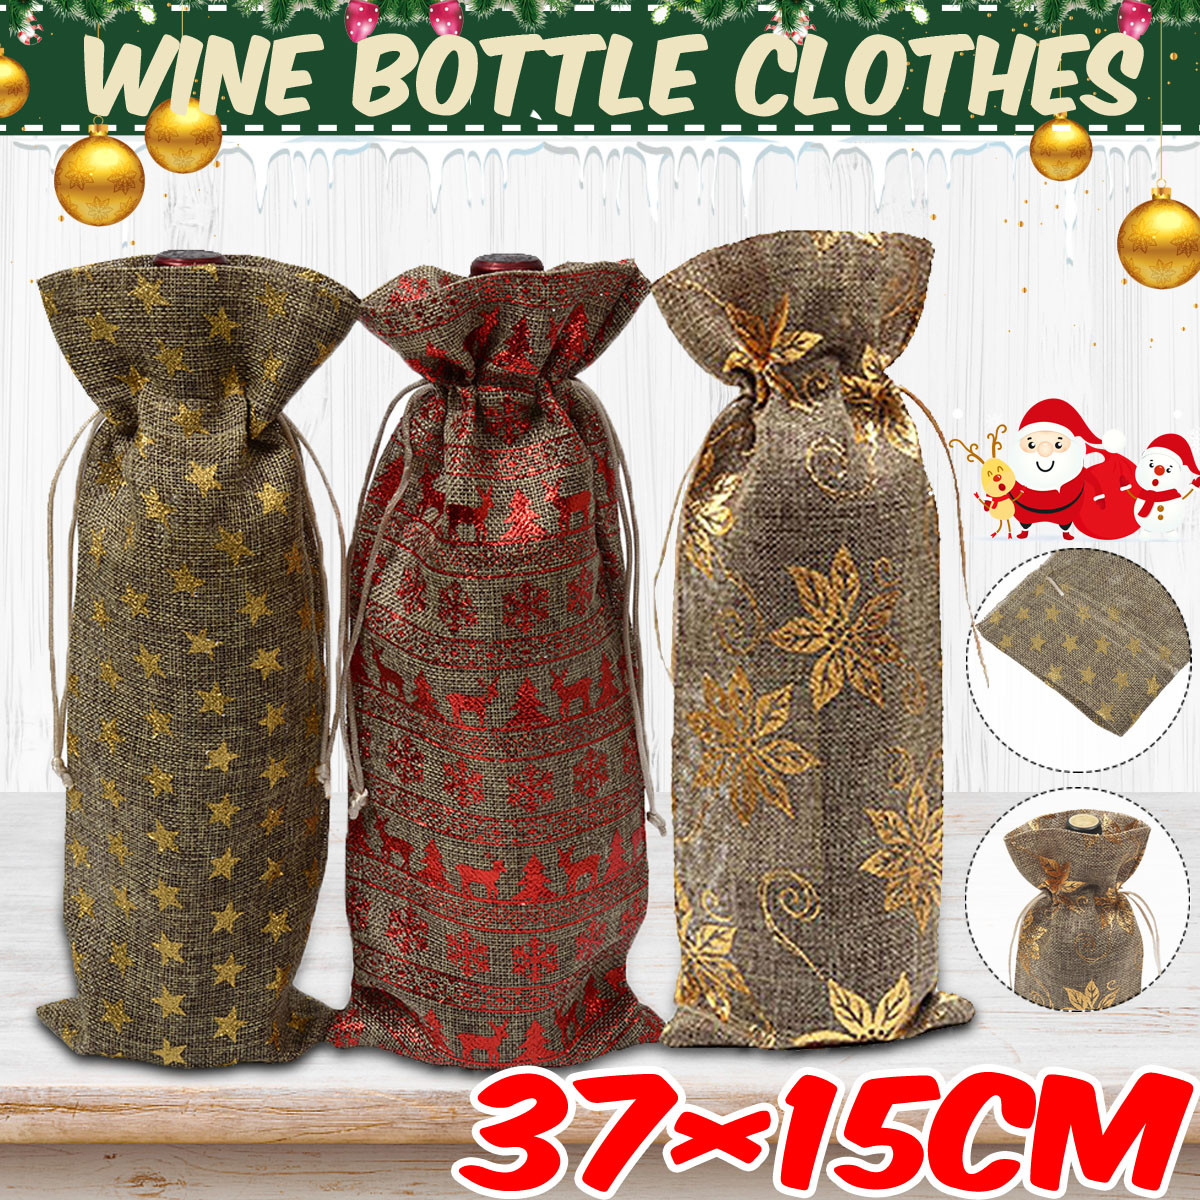 Christmas-Sweater-Winee-Bottle-Clothes-Linenmaterial-Soft-Light-Weight-ReusableRed-Winee-Set-Tools-1720496-1